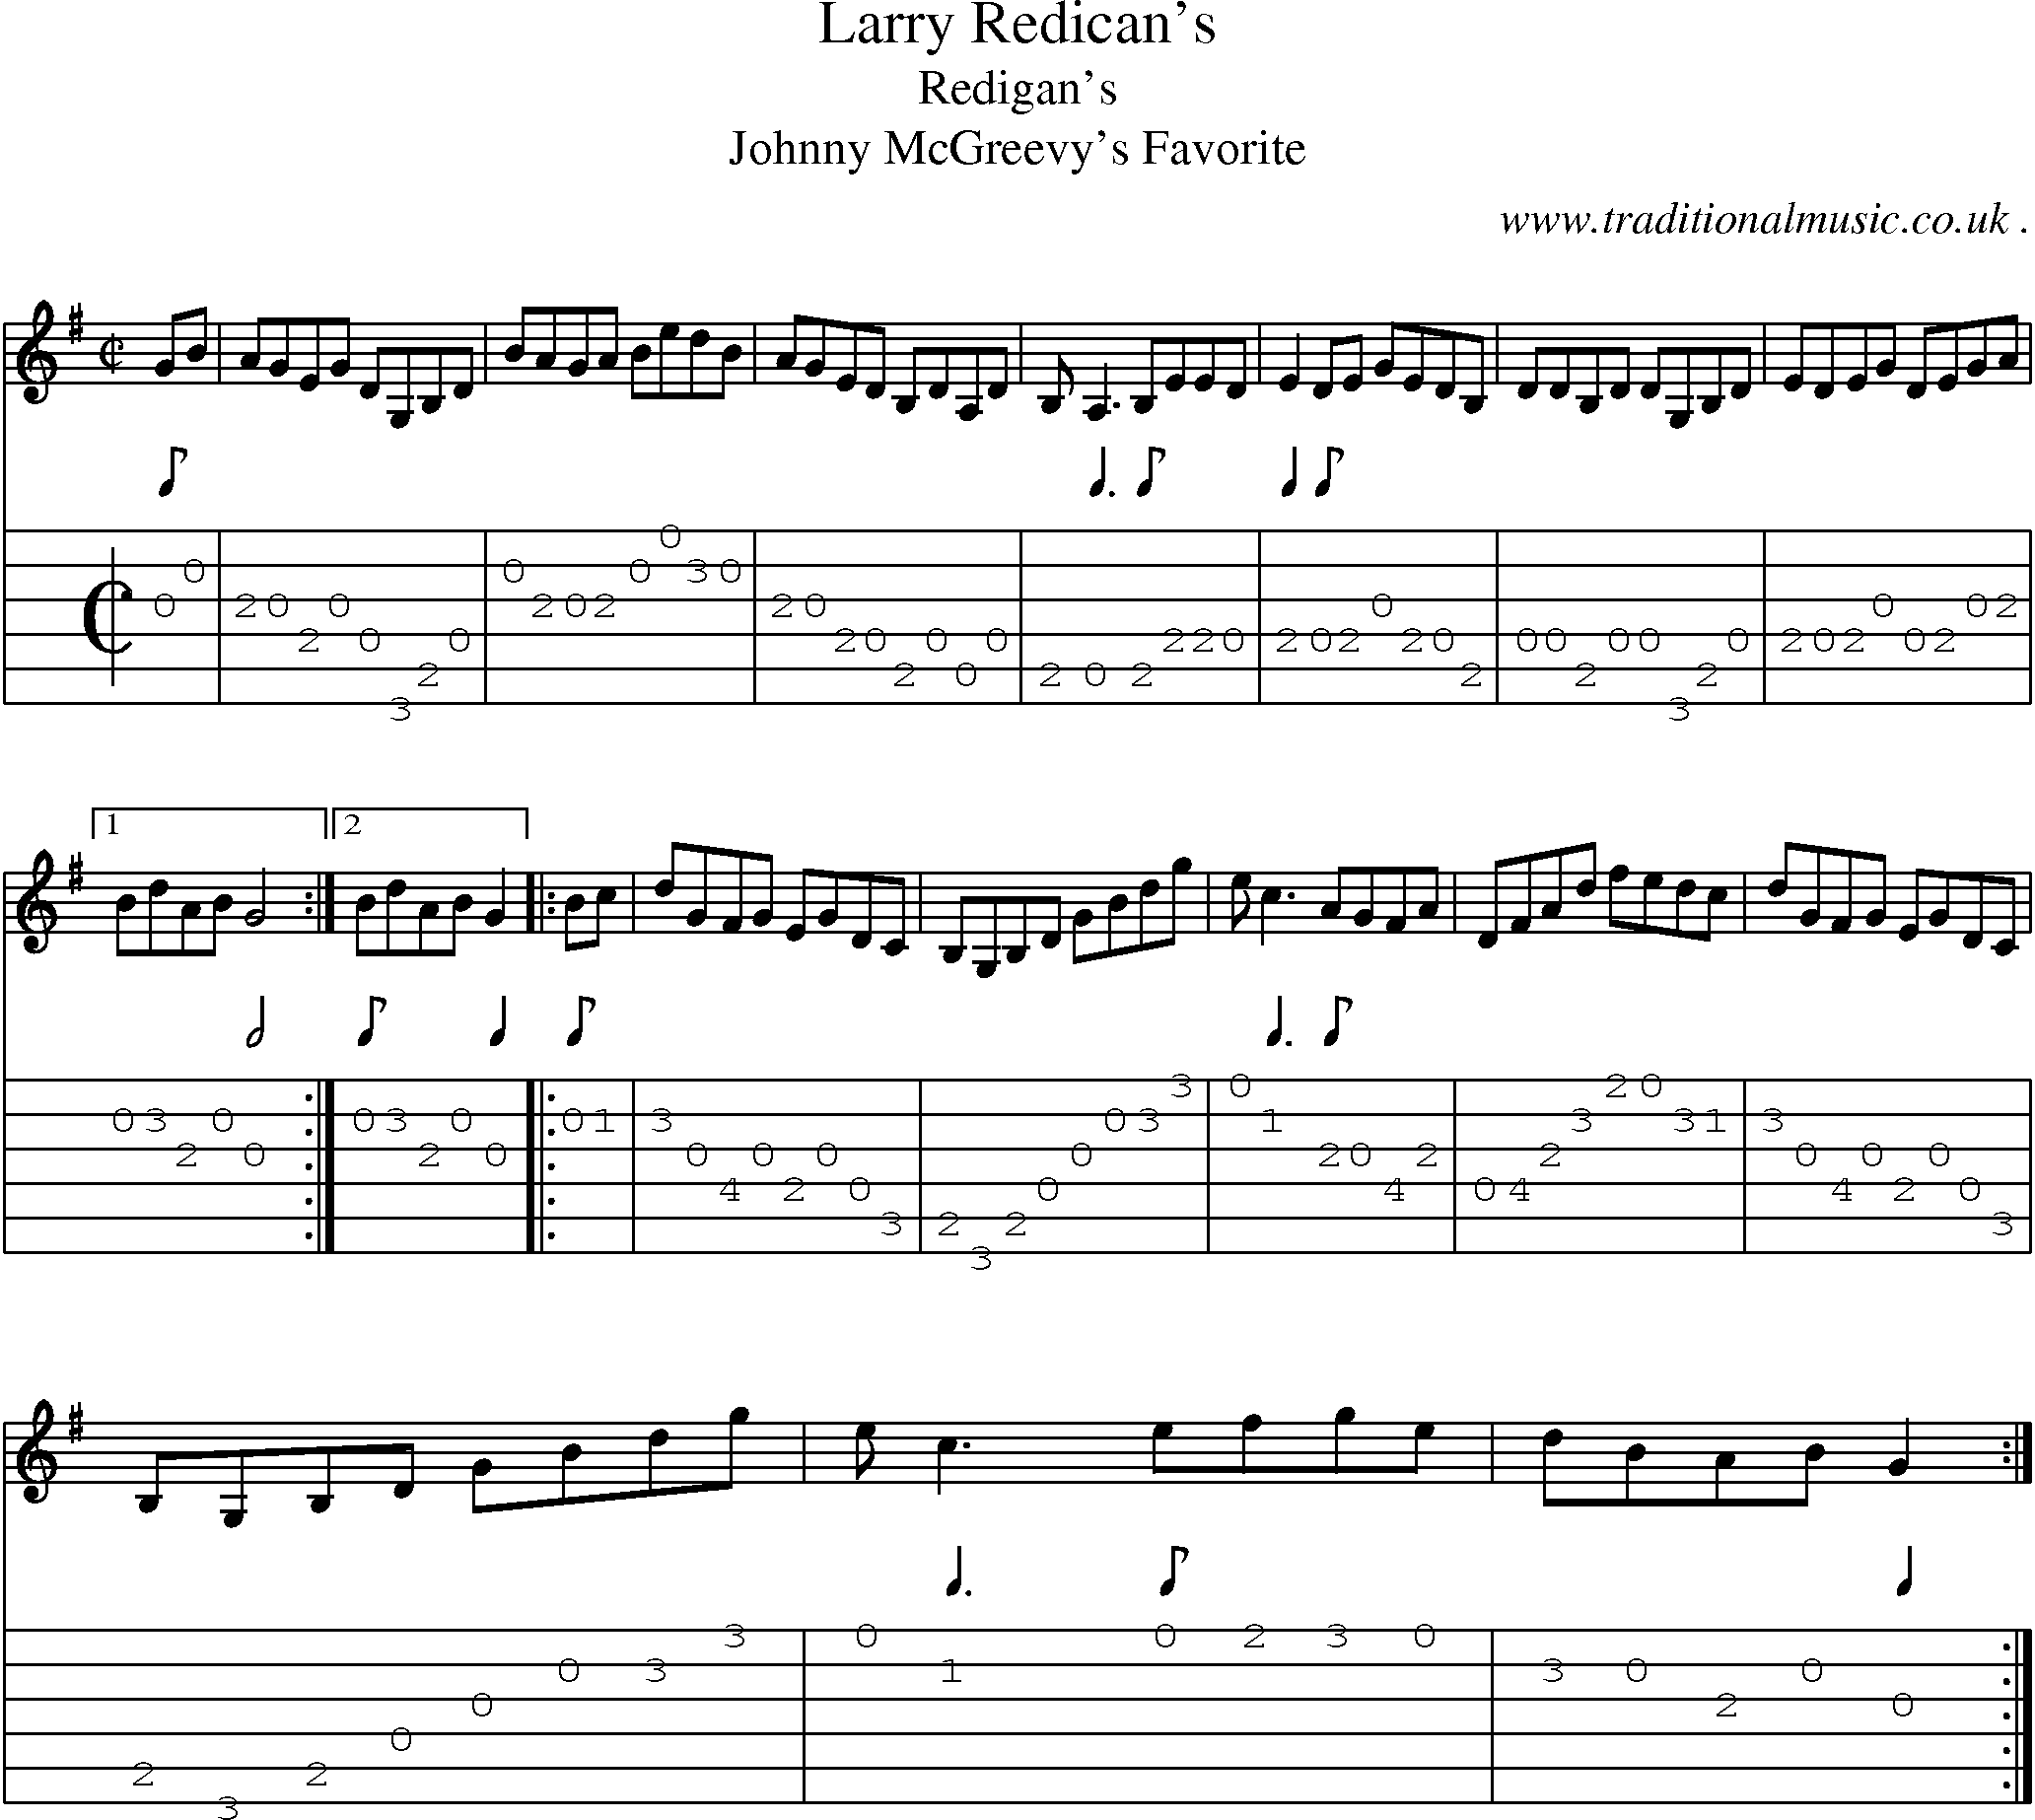 Sheet-Music and Guitar Tabs for Larry Redicans